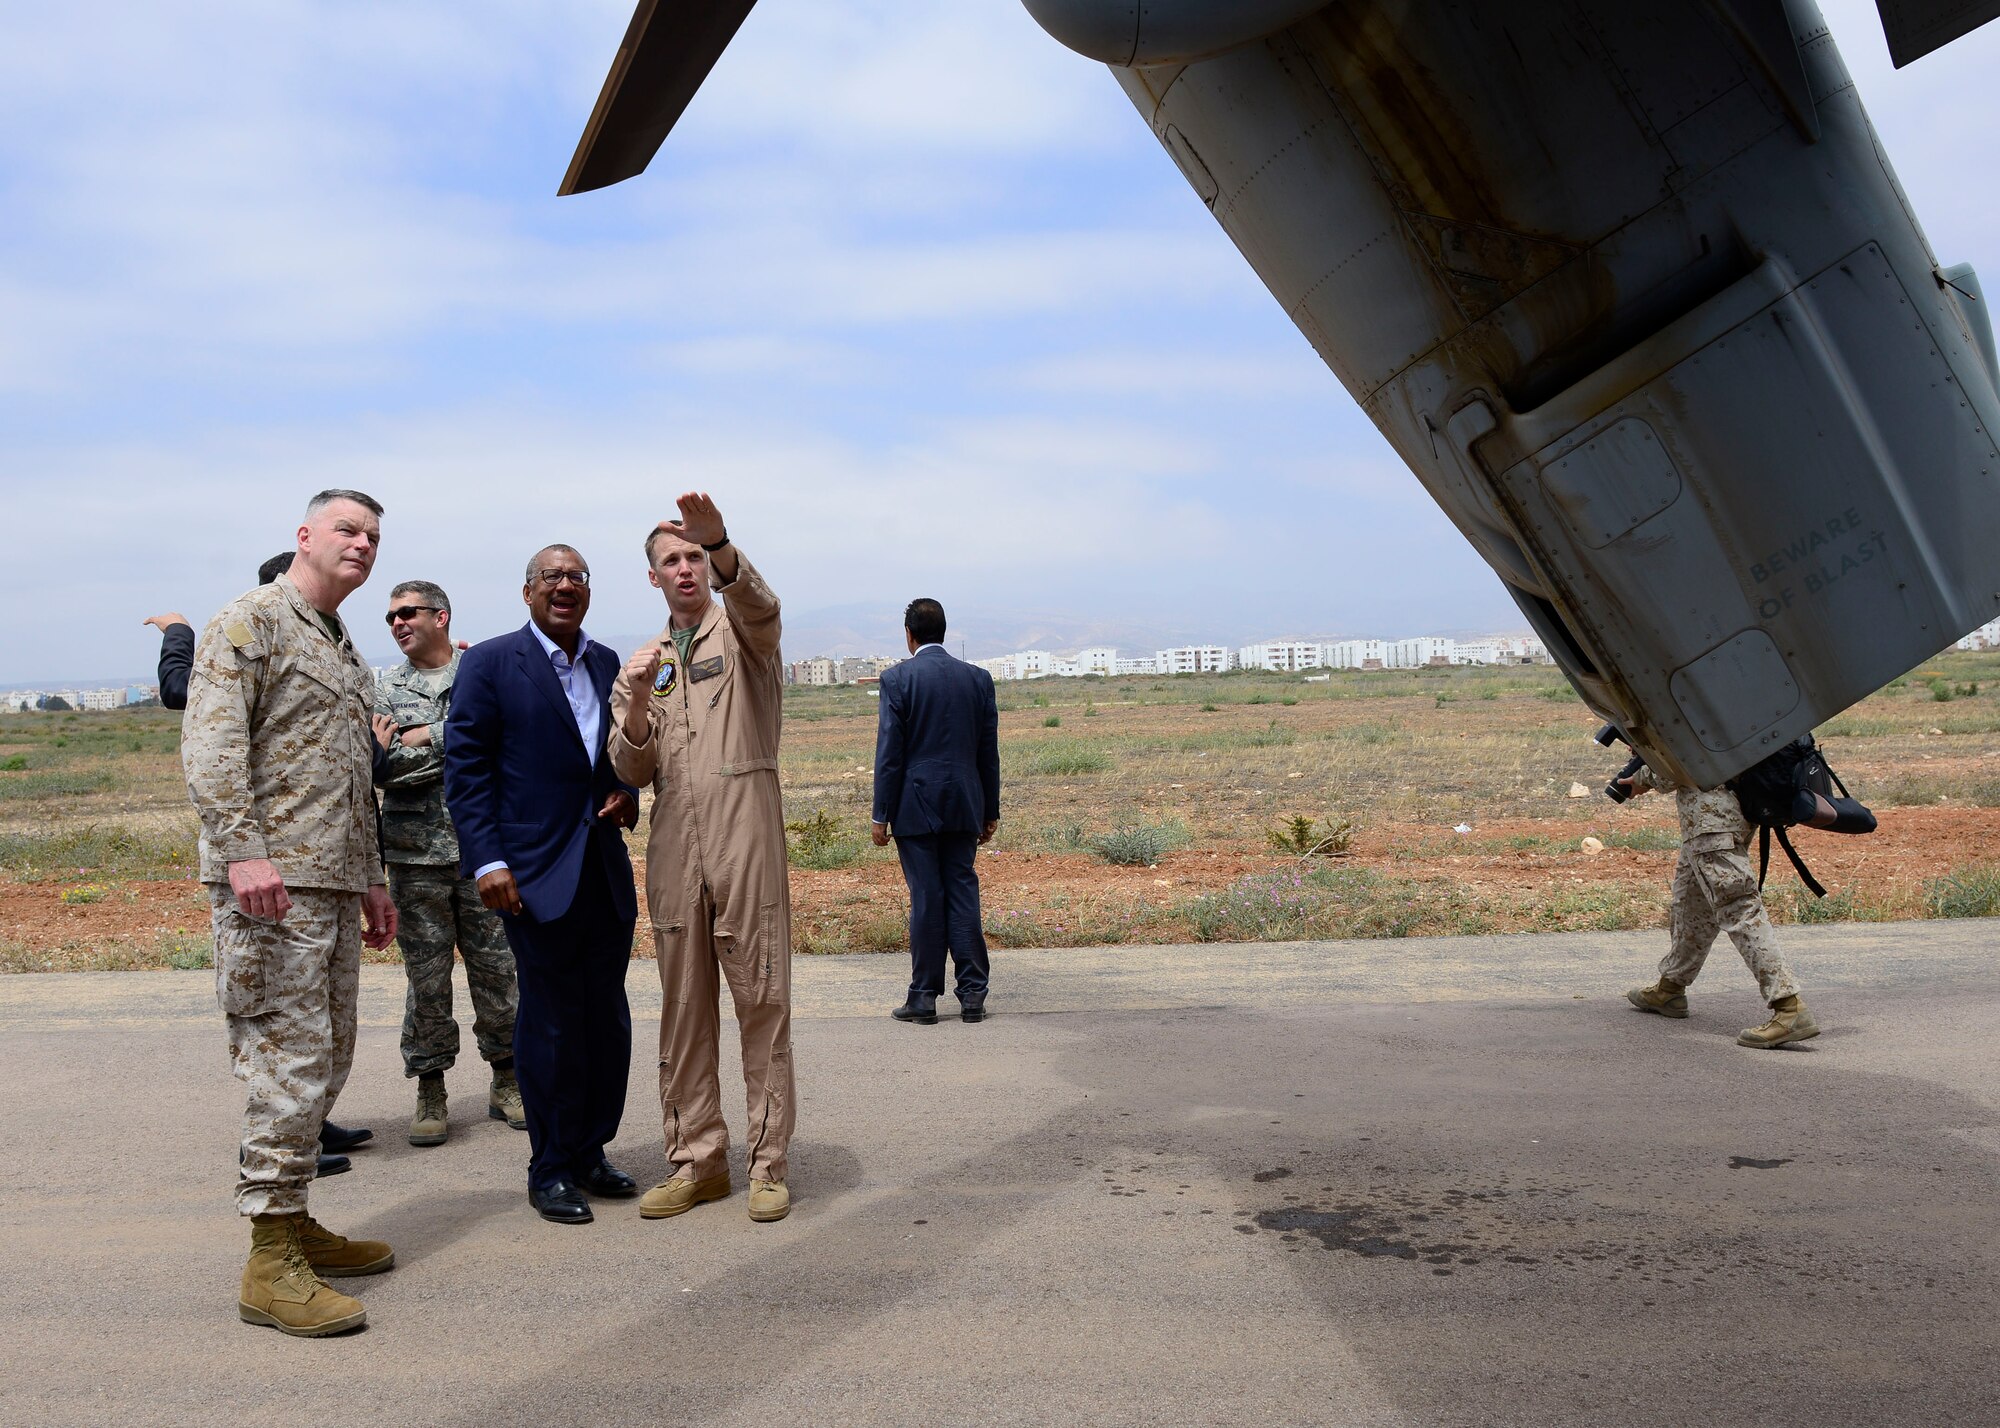 A U.S. Marine Corps MV-22 Osprey pilot explains features of the aircraft to Ambassador Dwight Bush, U.S. Ambassador to Morocco, and Maj. Gen. Niel E. Nelson, U.S. Marine Corps Forces Europe and Africa commander, during AFRICAN LION 16 at Tifnit, Kingdom of Morocco, April 26, 2016. The U.S. Marine Forces Europe-Africa and Kingdom of Morocco-led joint, combined exercise brought together 11 different countries to participate in a Combined Joint Task Force command post exercise and a peace support operations field training exercise to improve interoperability between countries. (U.S. Air Force photo by Senior Airman Krystal Ardrey/Released)